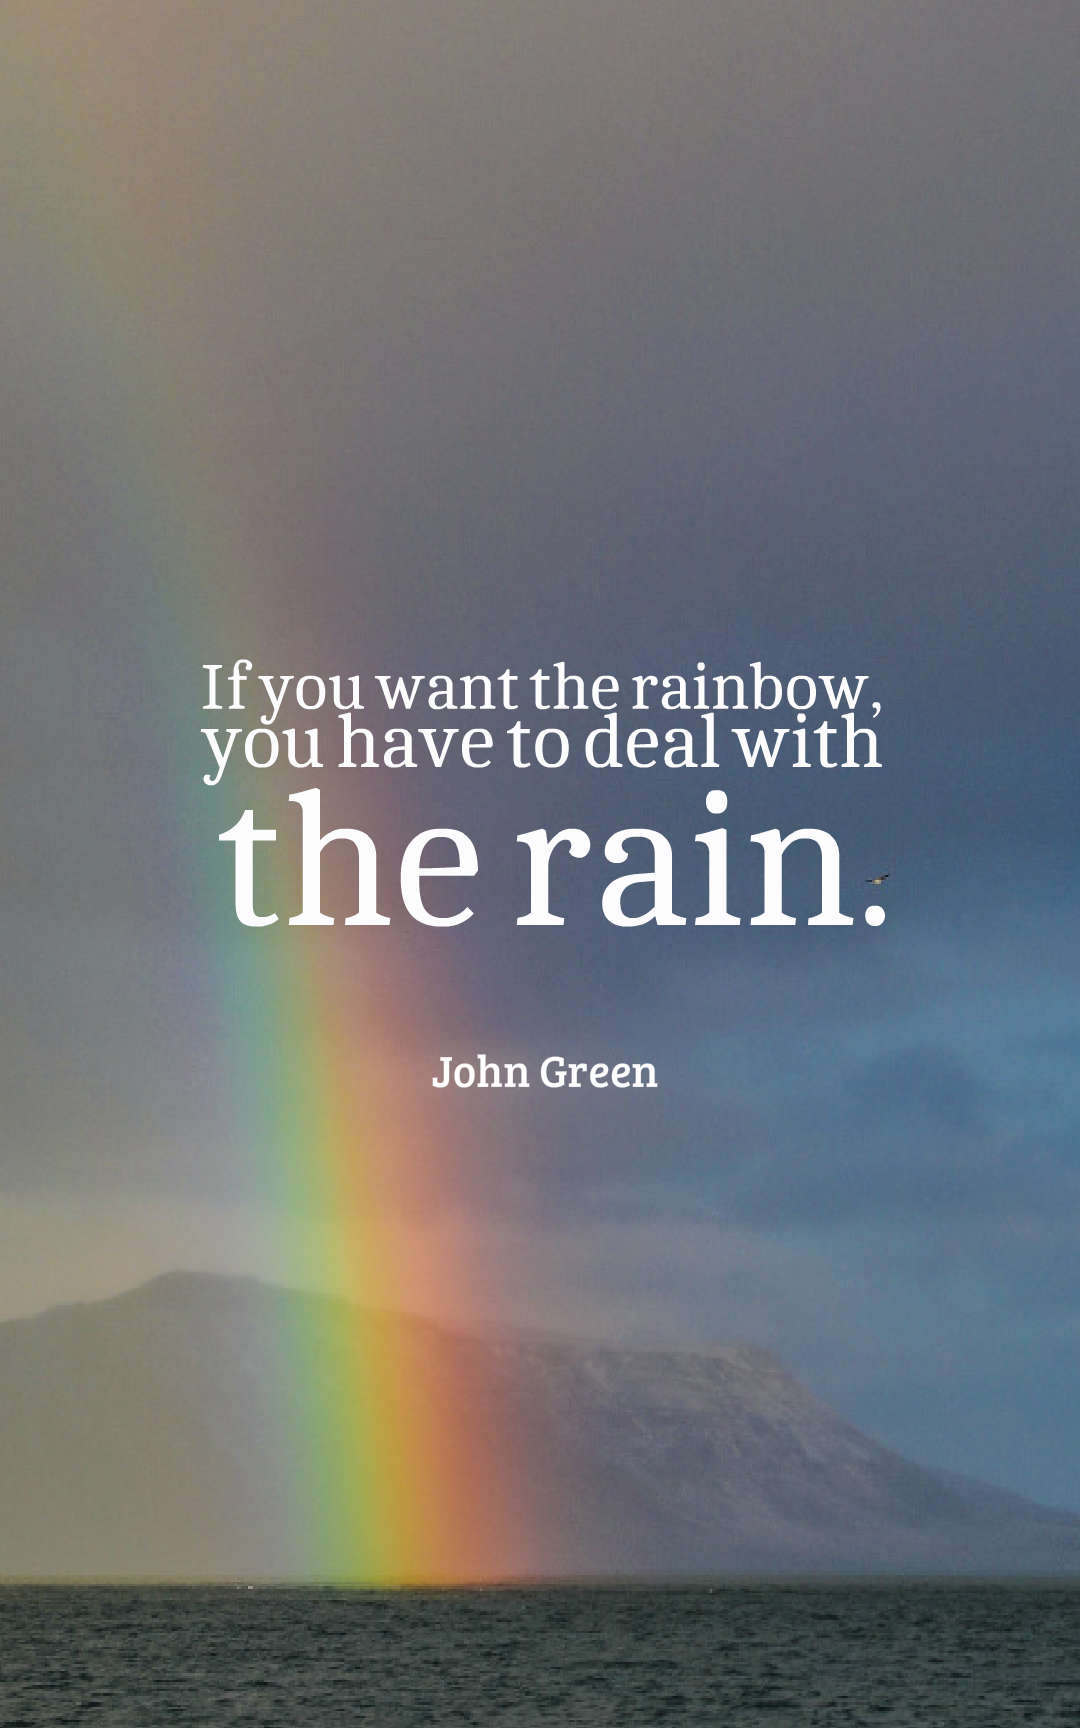 If you want the rainbow, you have to deal with the rain.